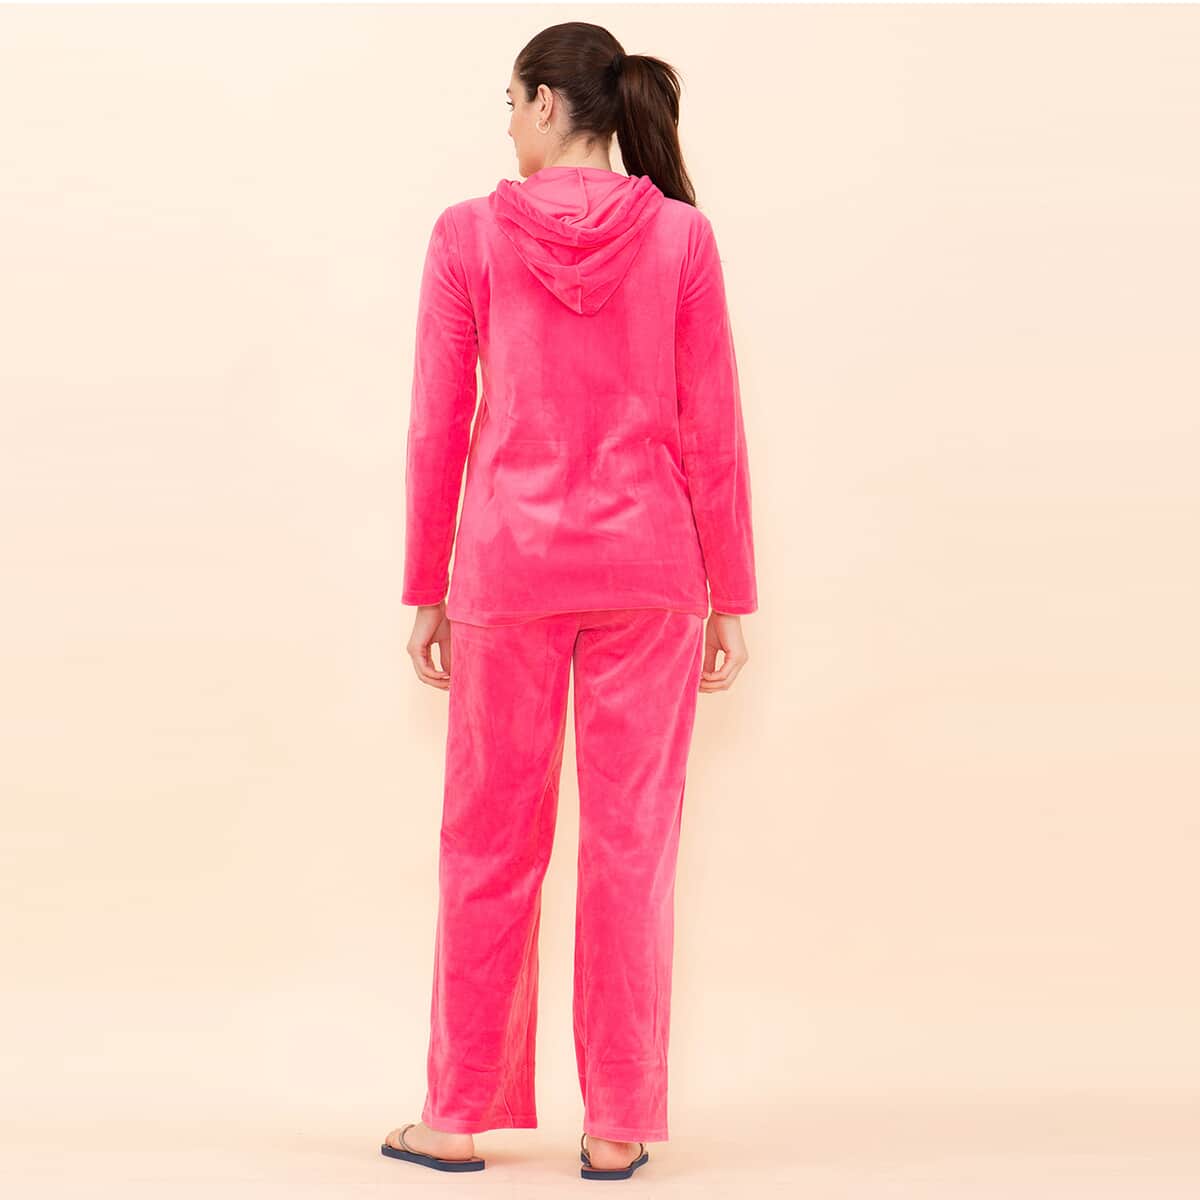 Tamsy LUX Pink Velour Track Suit Set - L image number 1